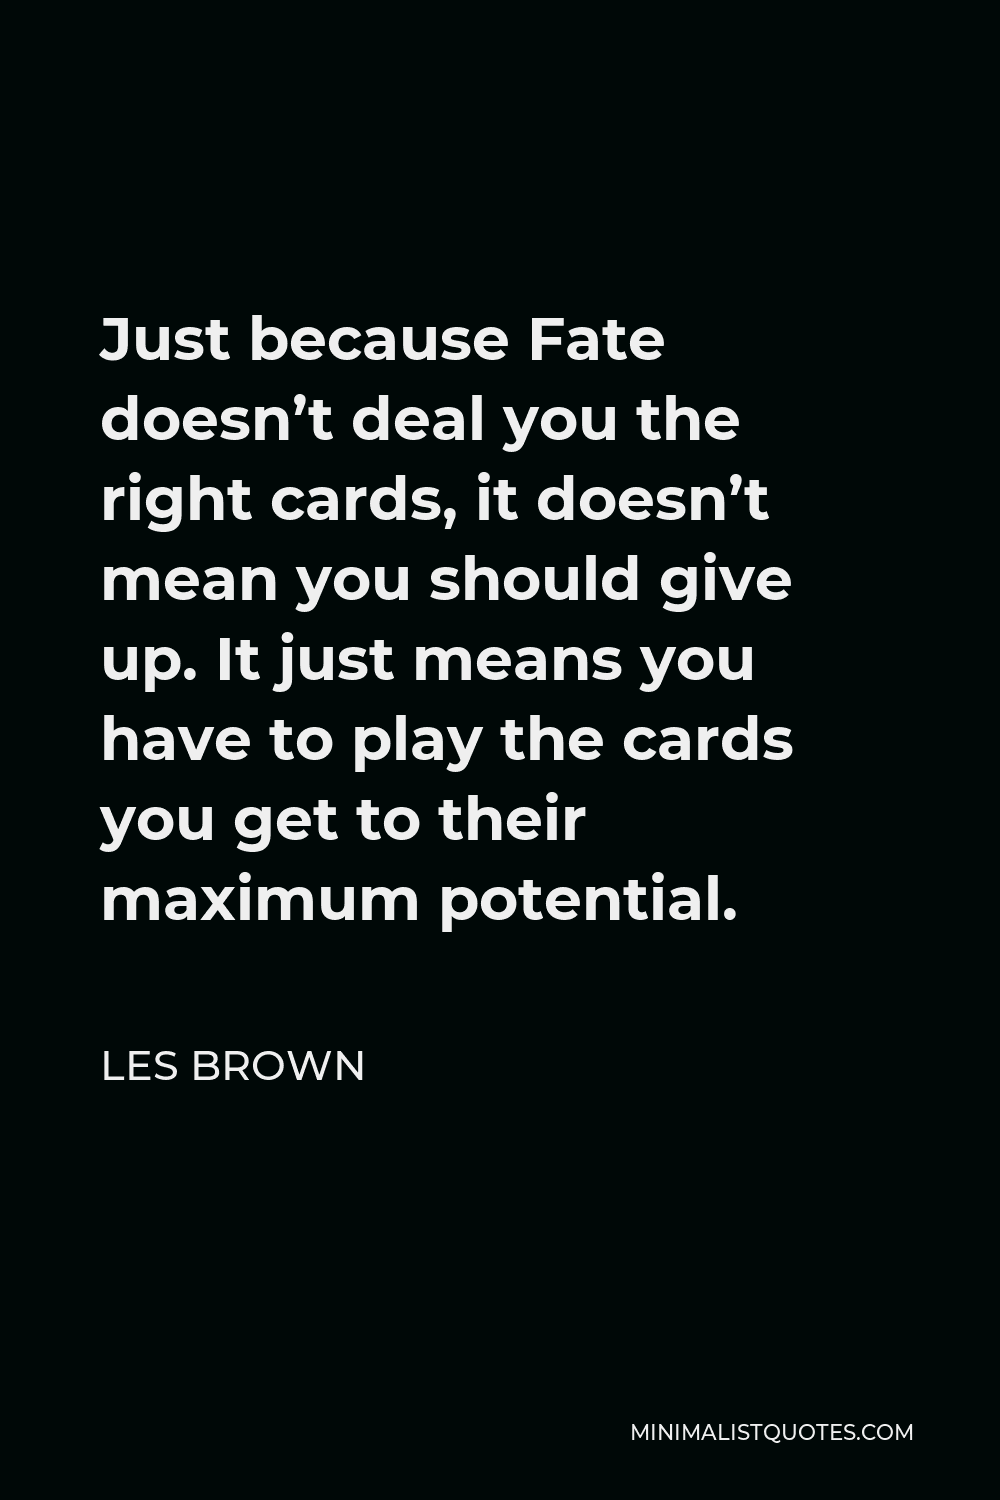 Les Brown Quote - Just because Fate doesn’t deal you the right cards, it doesn’t mean you should give up. It just means you have to play the cards you get to their maximum potential.